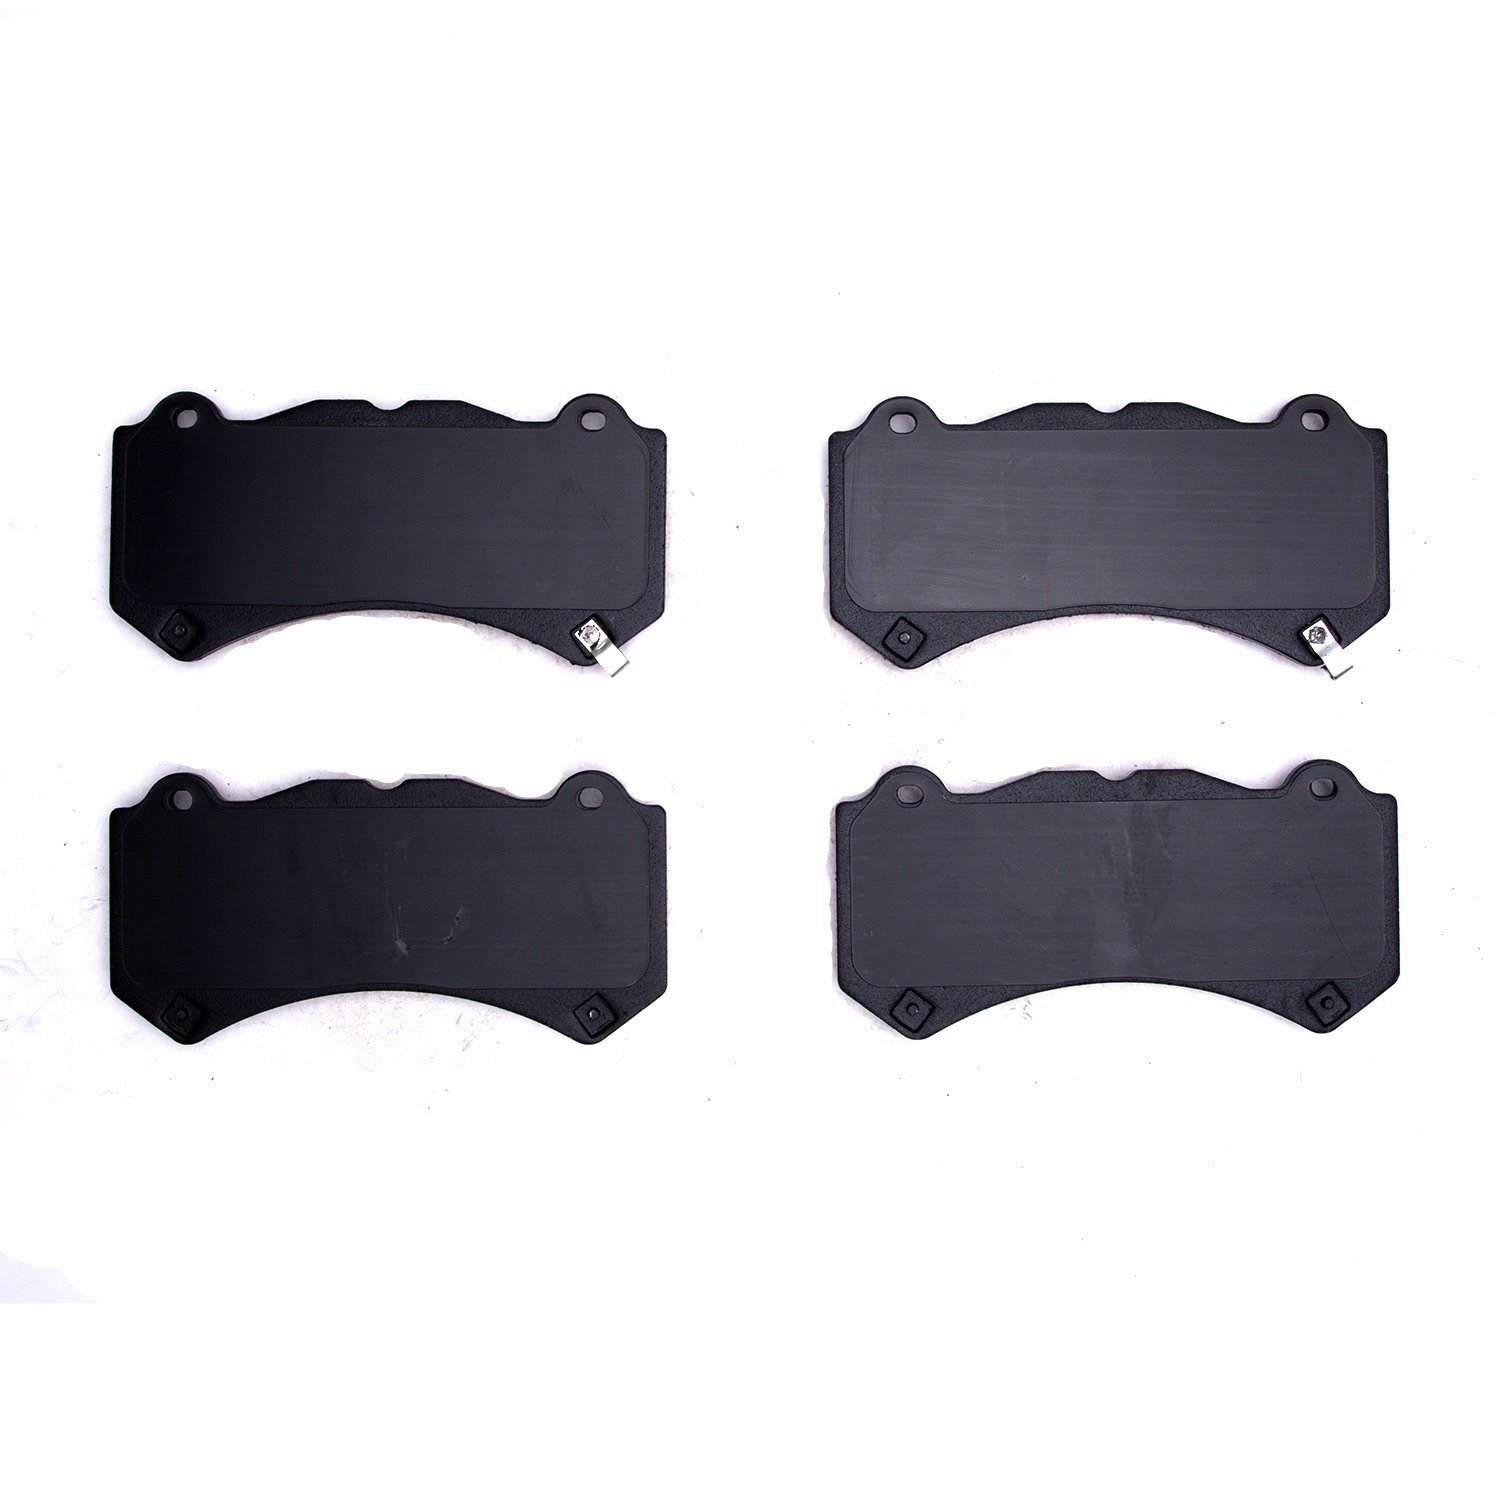 1310-1405-00 3000-Series Ceramic Brake Pads, Fits Select Multiple Makes/Models, Position: Front